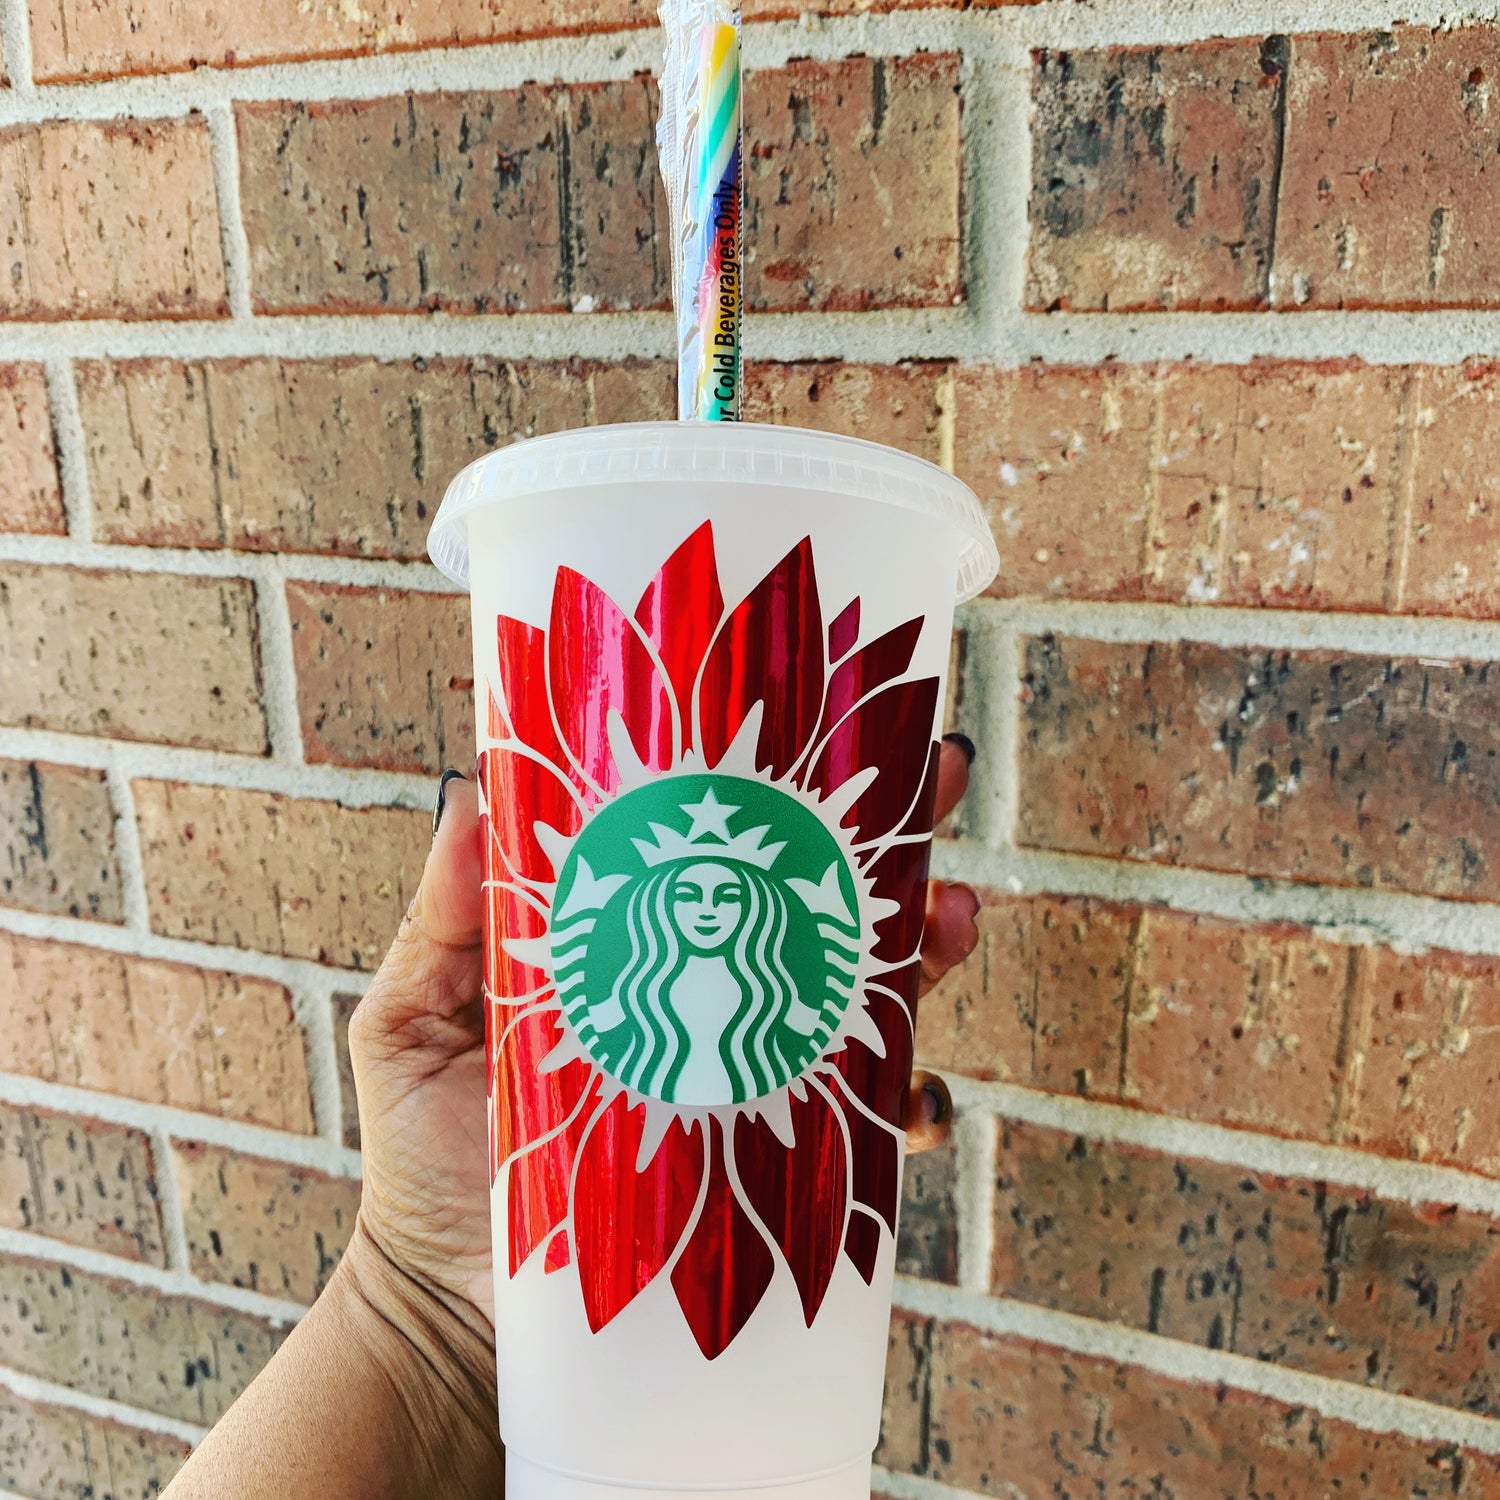 Starbucks Cold Cup with Sunflower Vinyl Decal